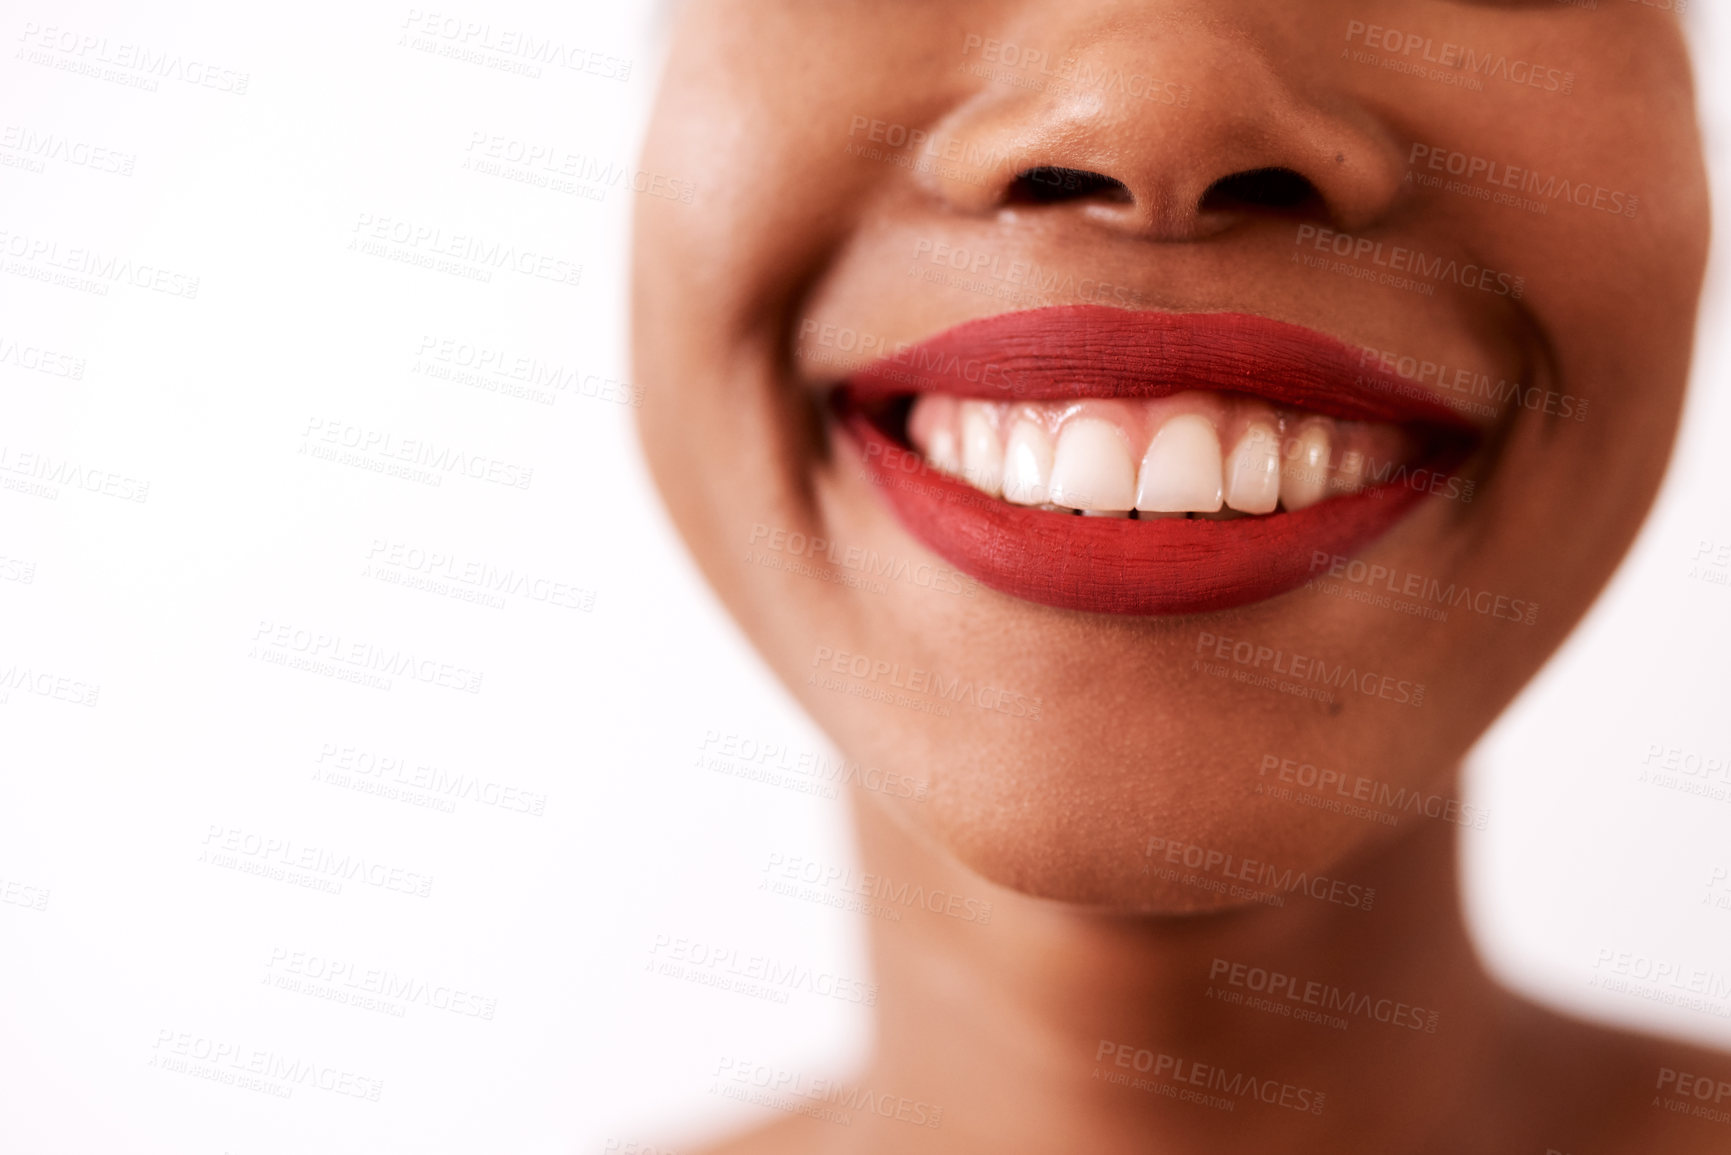 Buy stock photo Studio shot of an unrecognizable woman wearing red lipstick against a white background